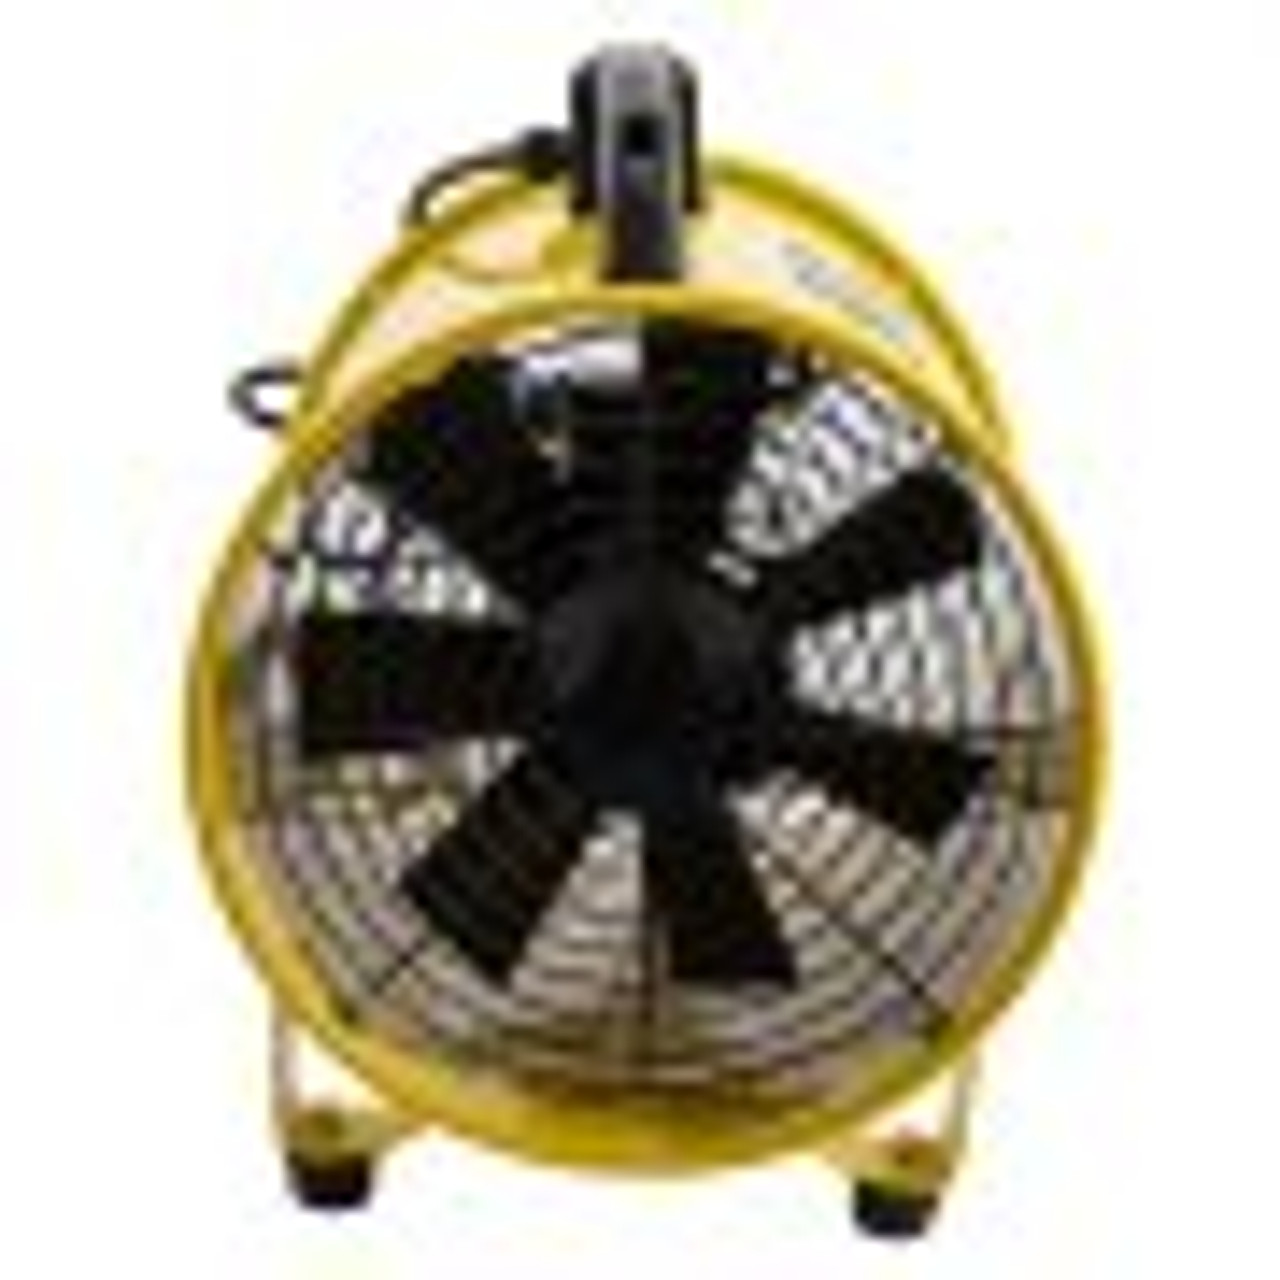 Utility Blower Fan, 12 Inches, 550W 1471 & 2295 CFM High Velocity Ventilator w/ 16 ft/5 m Duct Hose, Portable Ventilation Fan, Fume Extractor for Exhausting & Ventilating at Home and Job Site